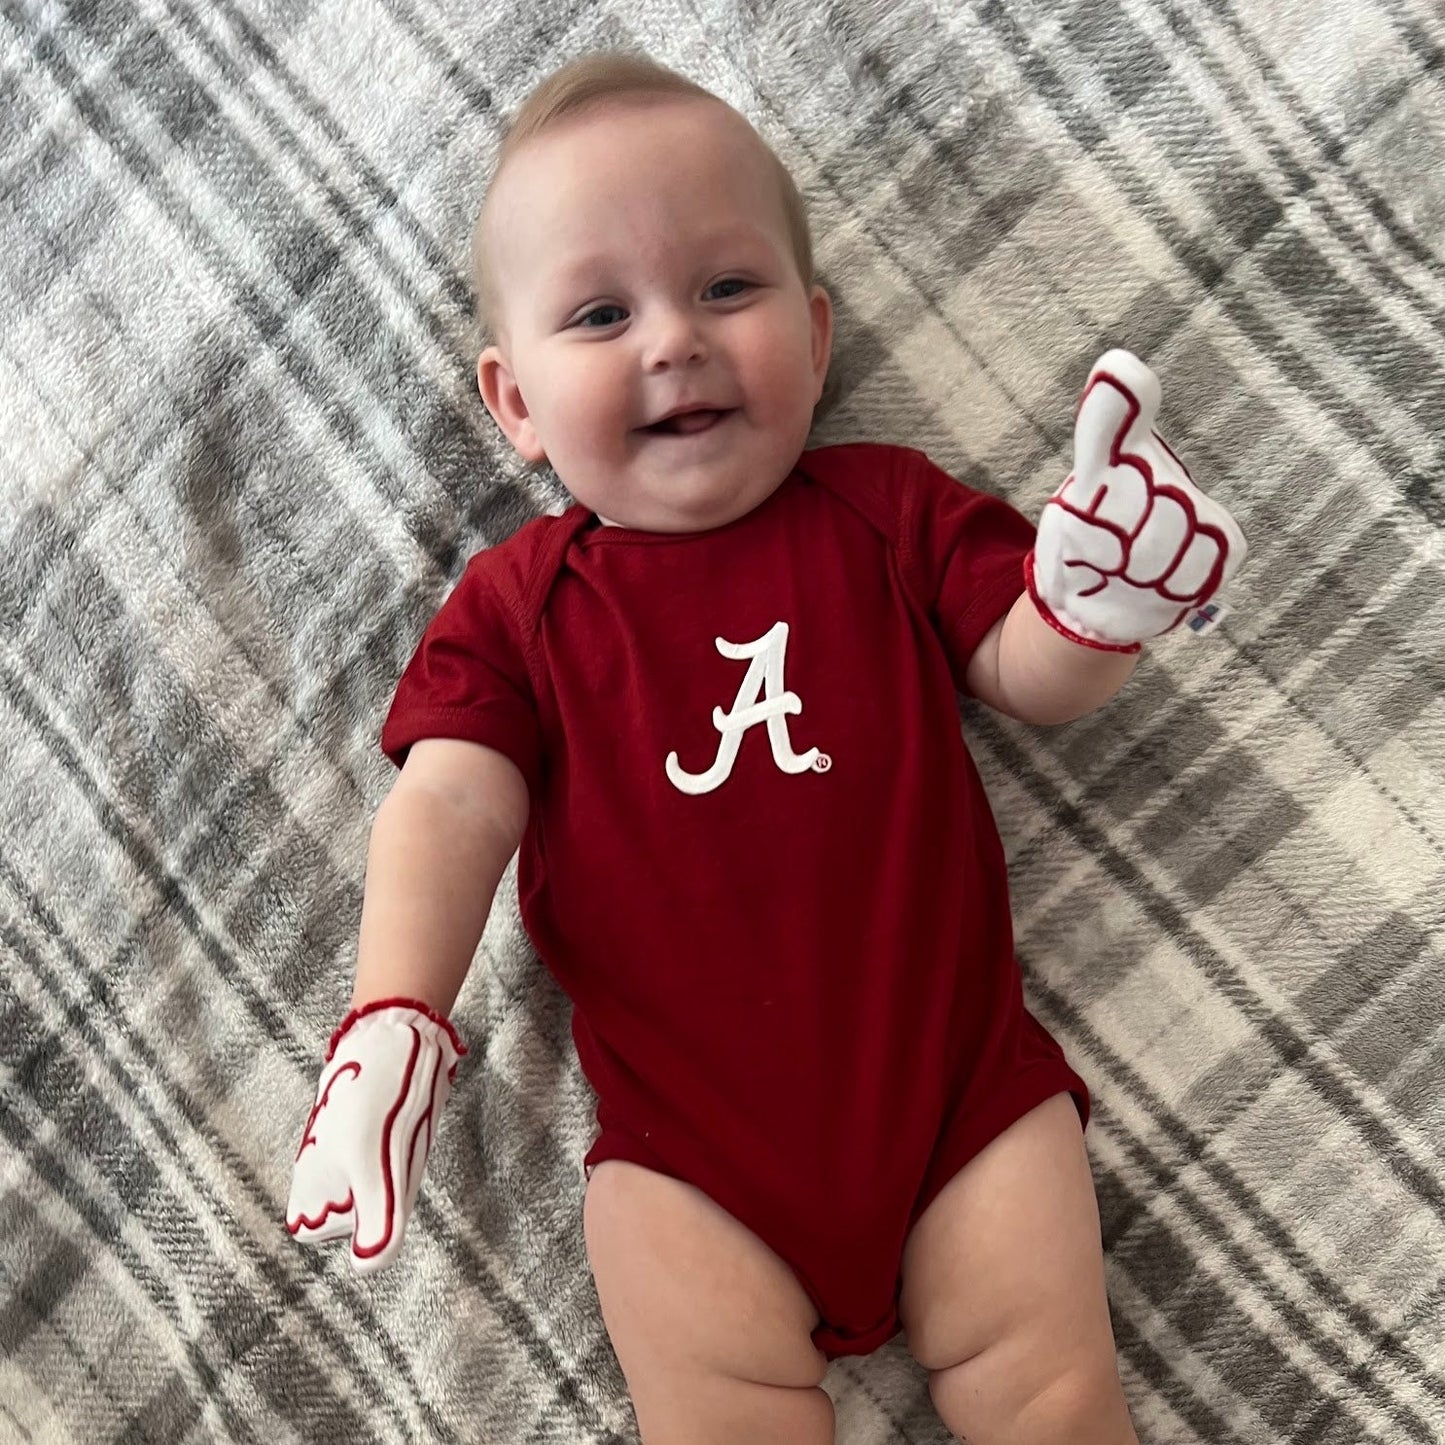 Infant wearing Alabama baby mittens in white